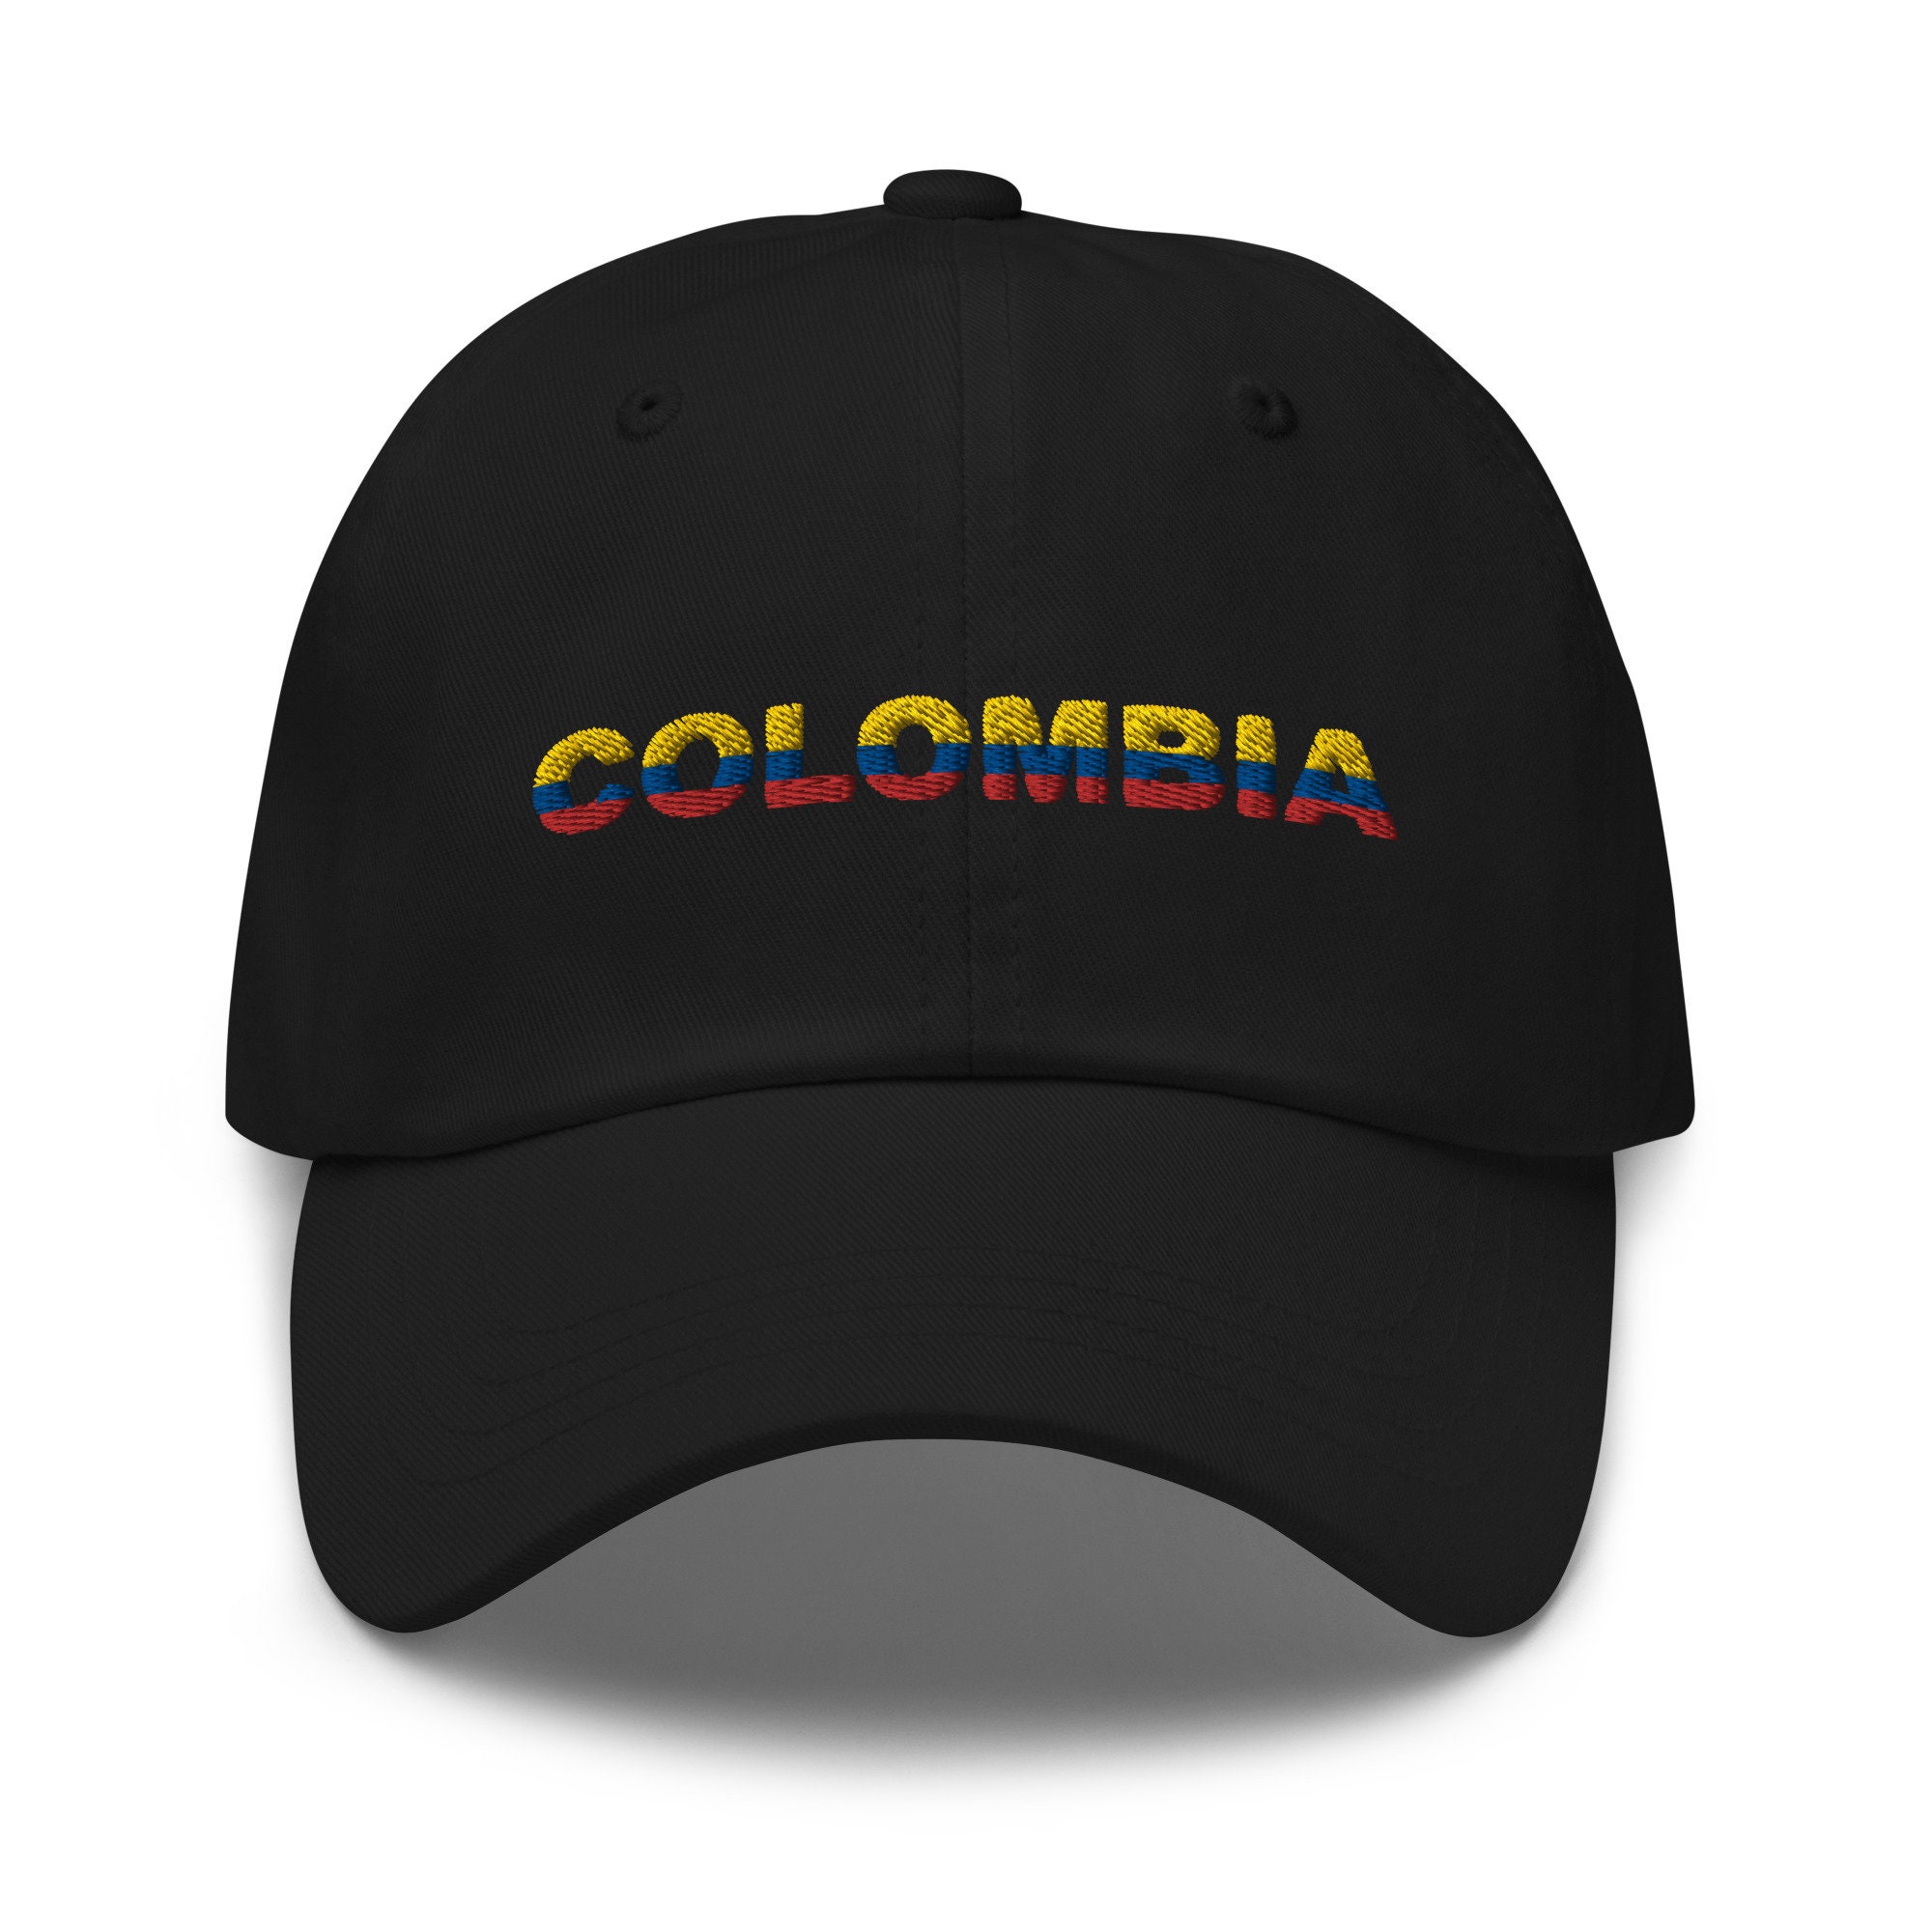 Colombia Embroidered Adjustable Dad Hat, Colombian Girl Latina Power,  Unstructured 6-panel, Low-profile, Baseball Cap Multiple Colors 